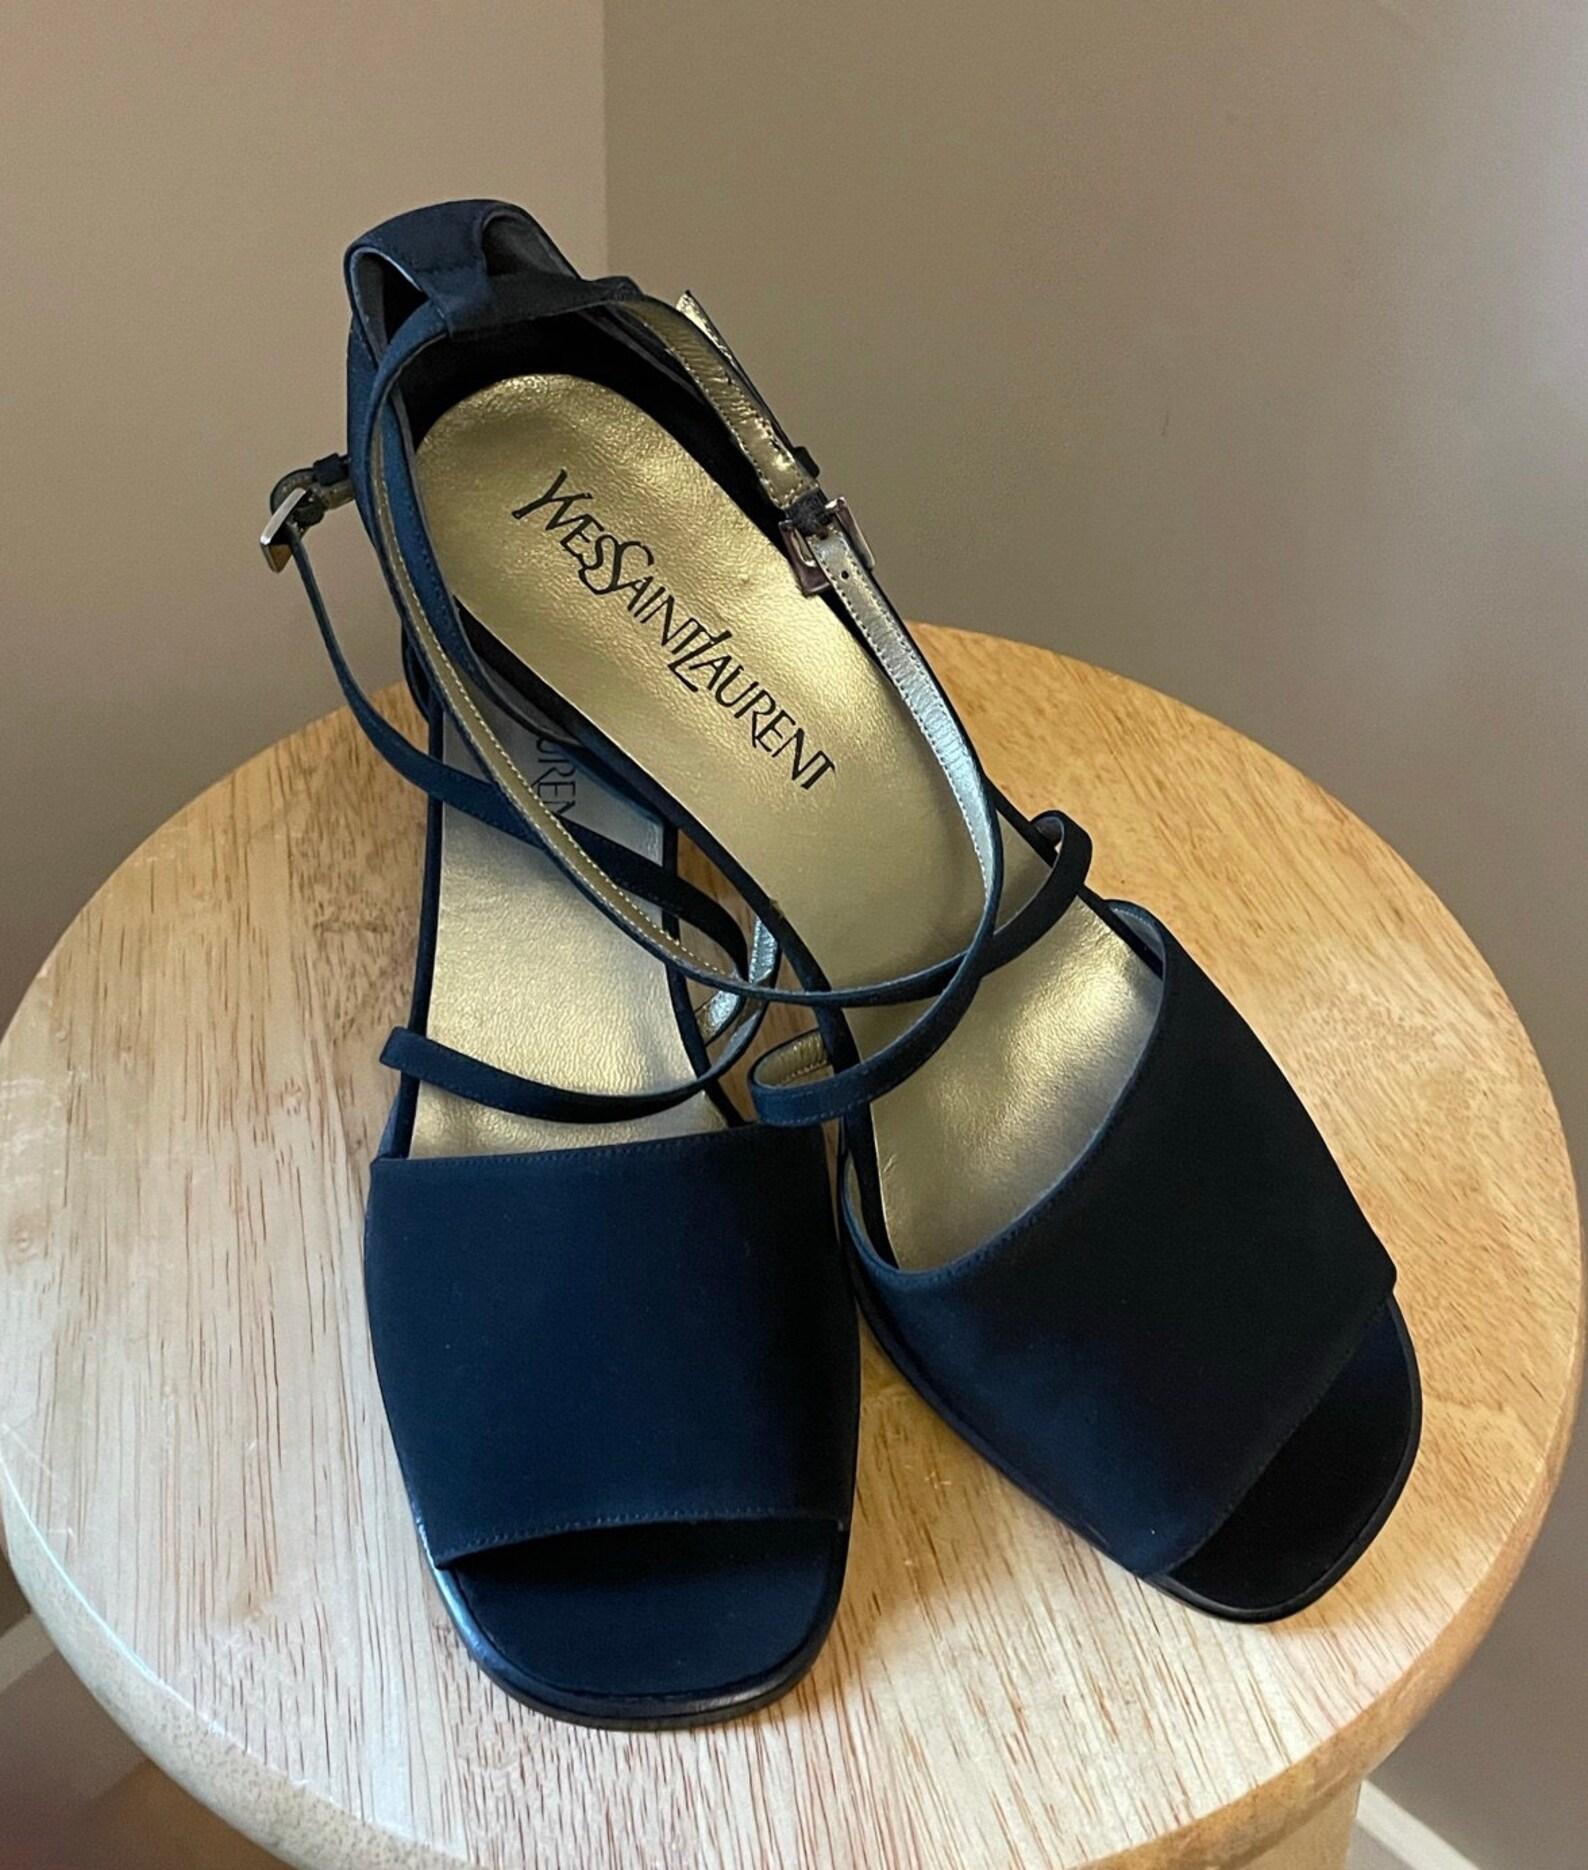 Yves Saint Laurent block heel sandals In Excellent Condition For Sale In Brooklyn, NY